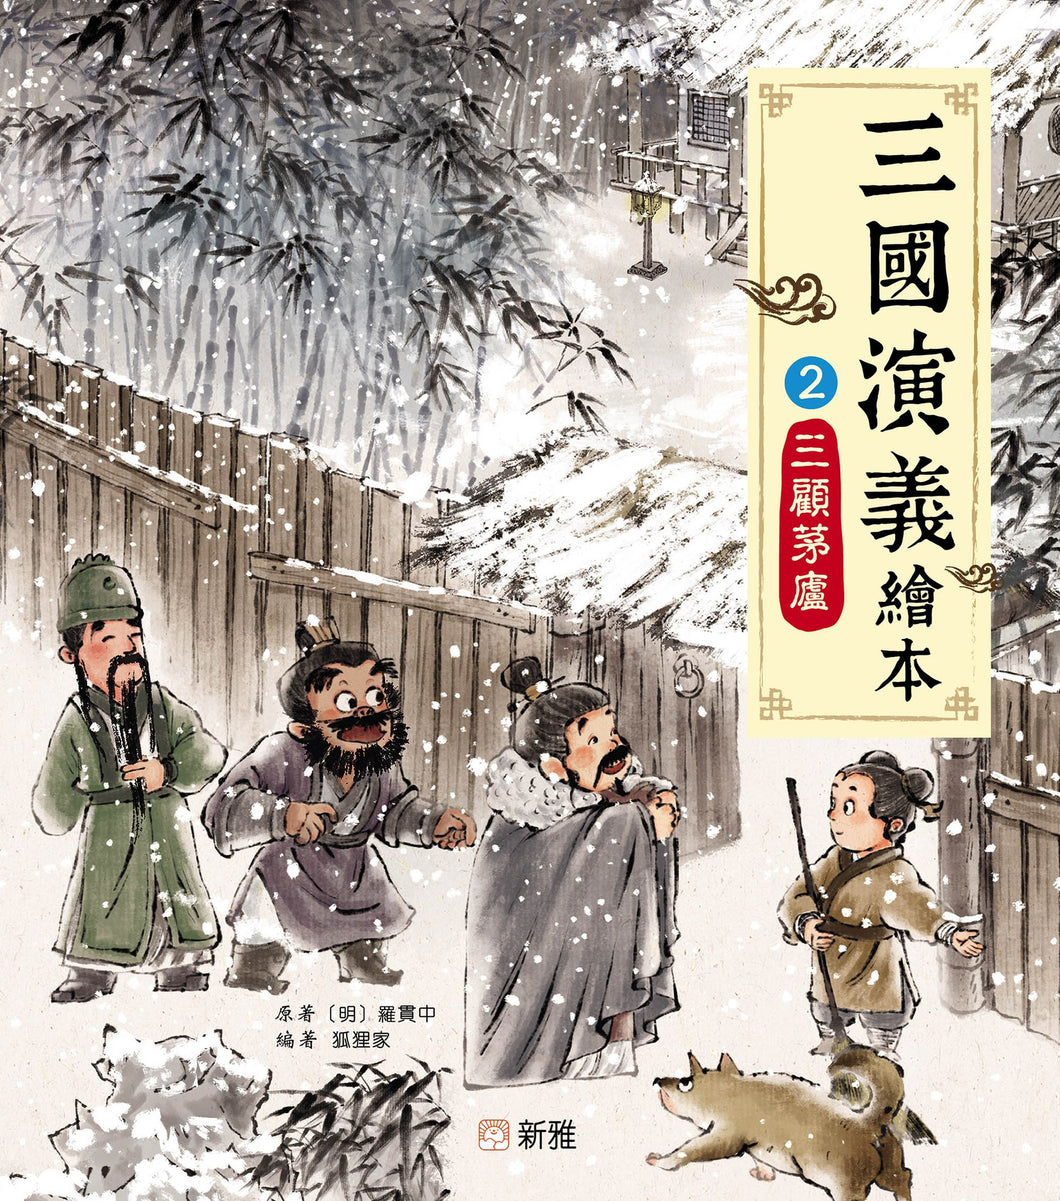 Romance of the Three Kingdoms #2: The Three Visits to the Thatched Cottage • 三國演義繪本 #2: 三顧茅廬